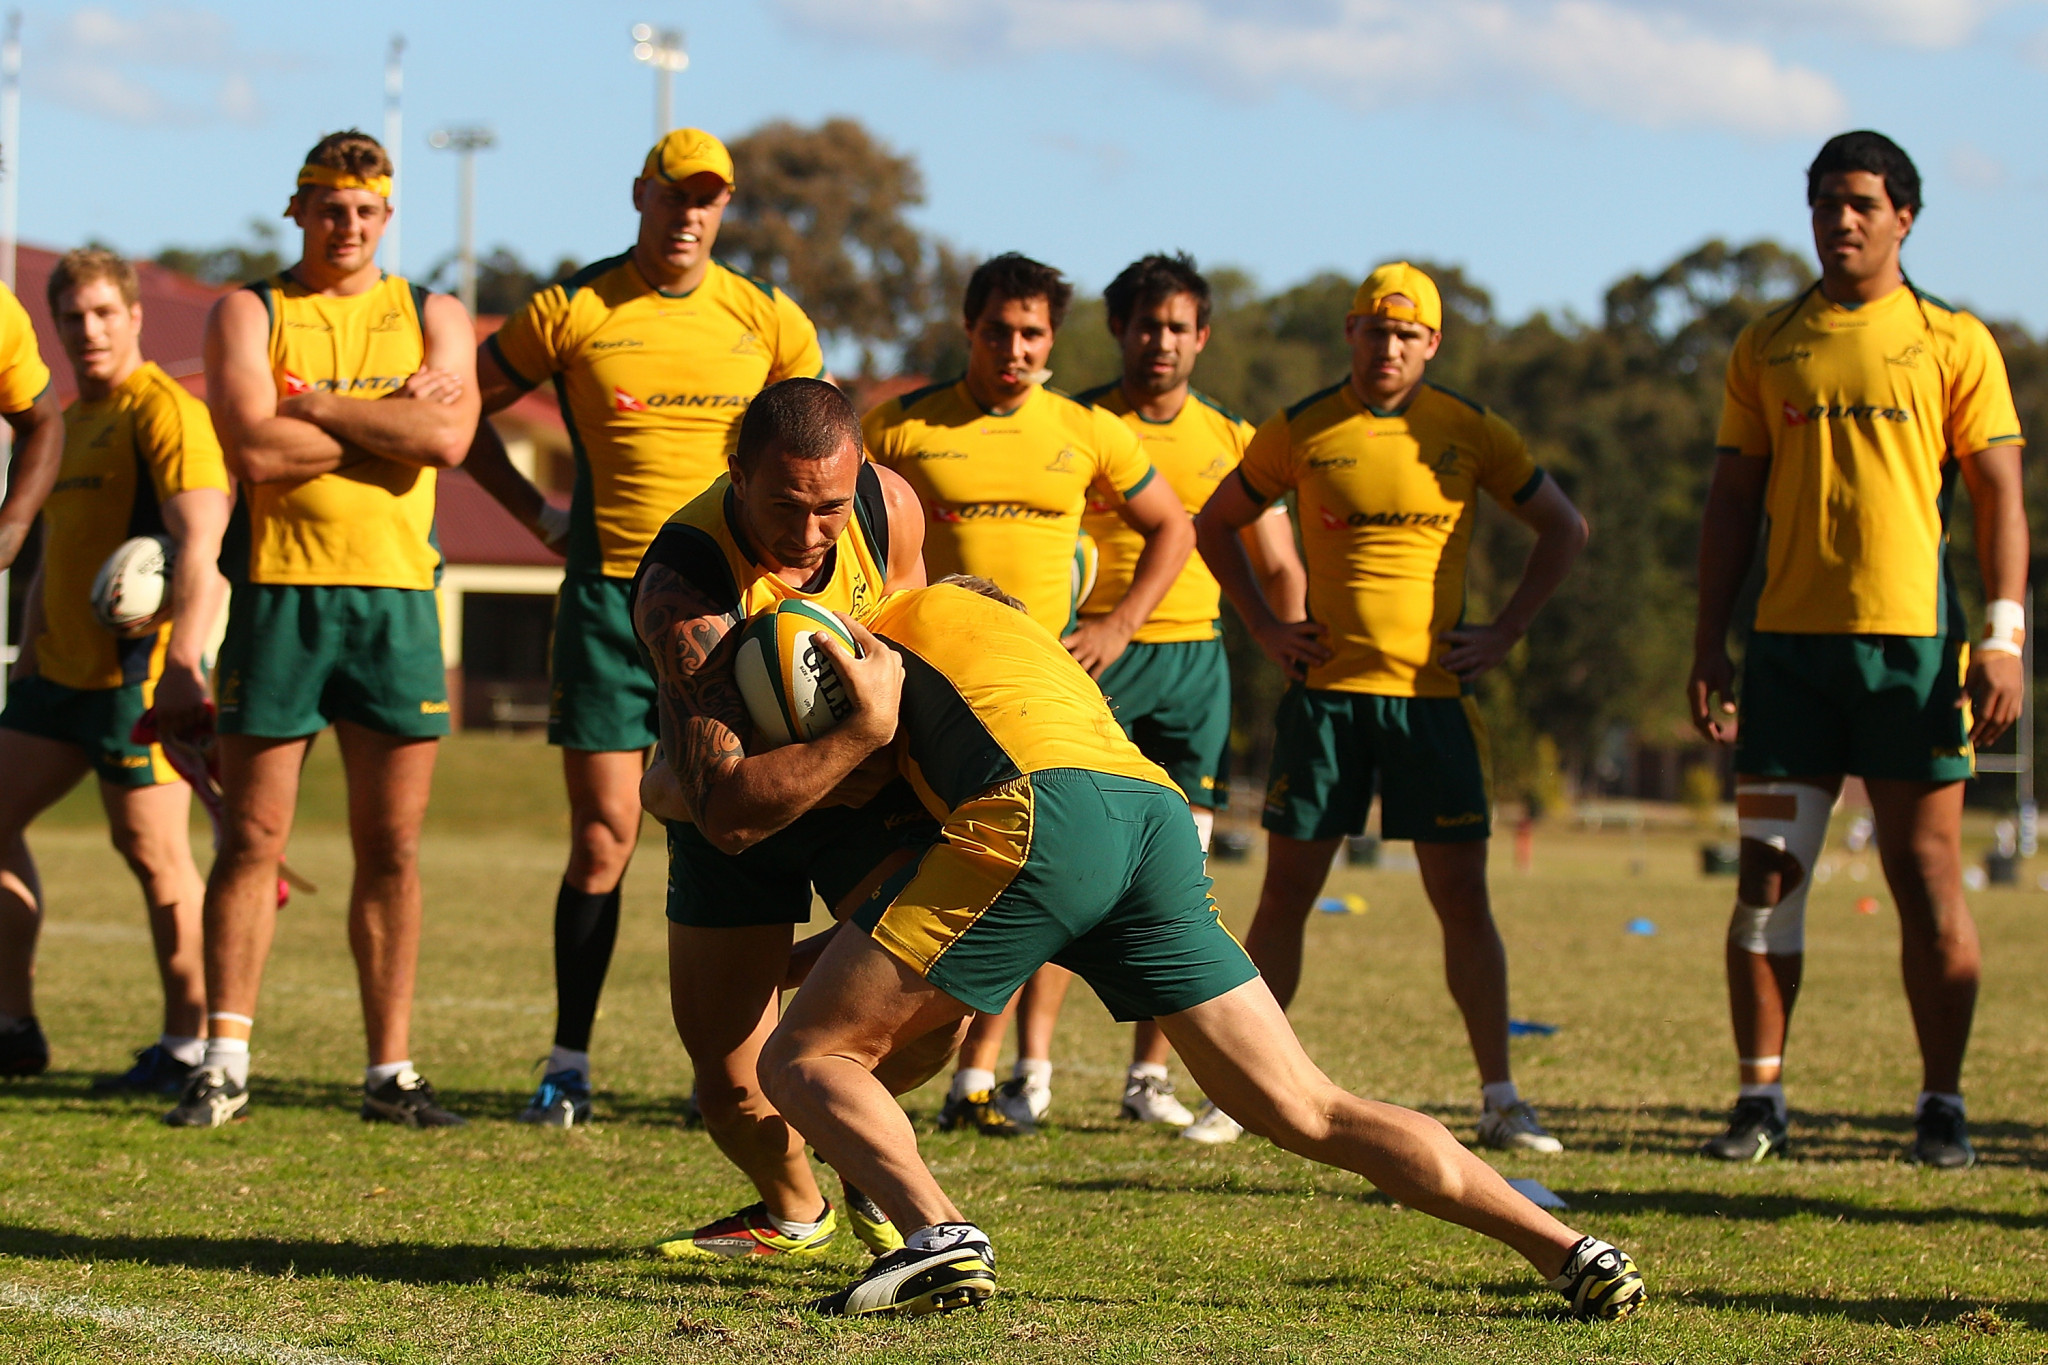 The Australian rugby union team have previously used the school's facilities for training ©Getty Images